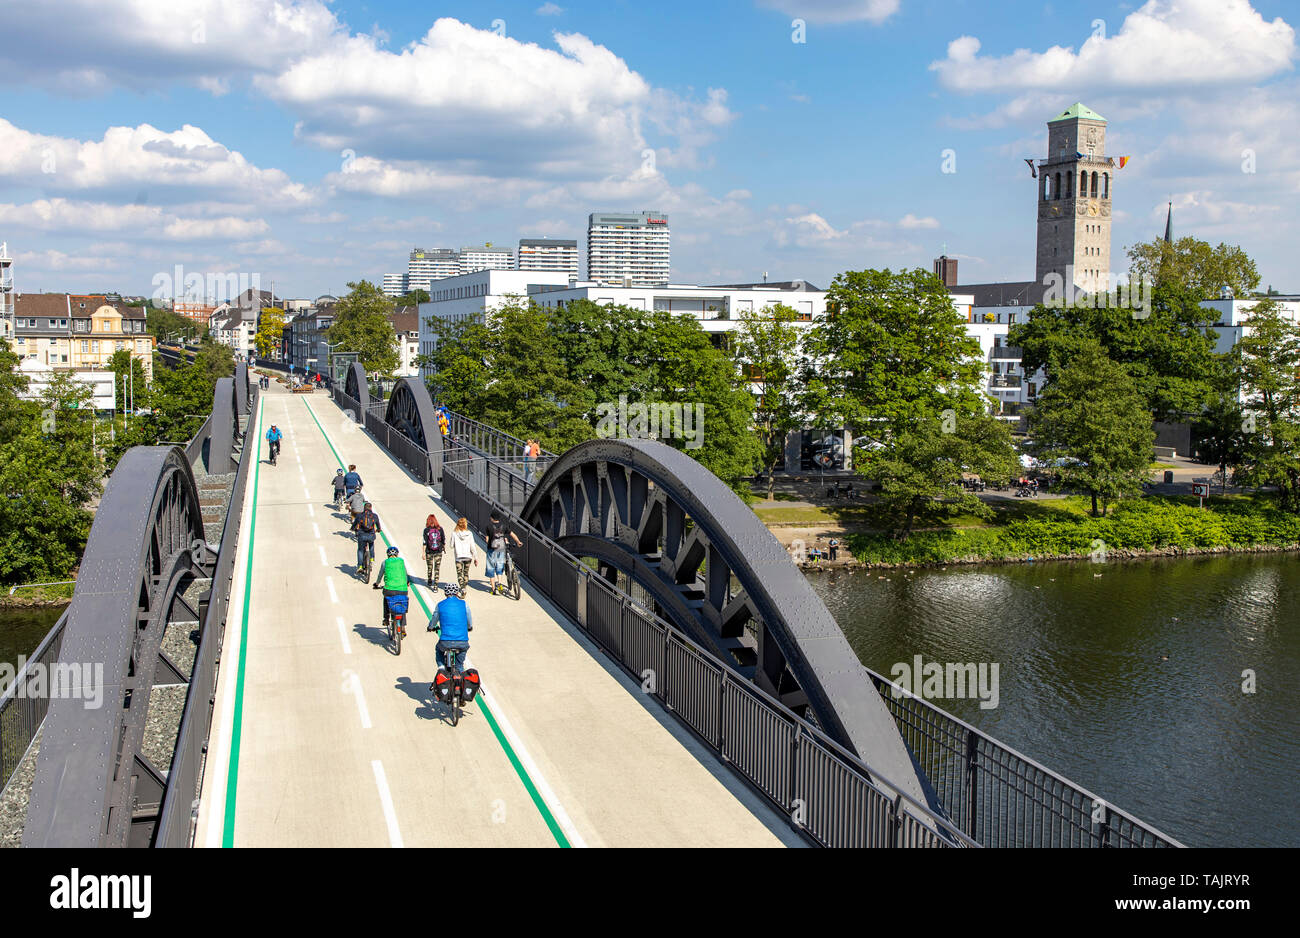 Radschnellweg RS1, a cycle highway,  in Mülheim an der Ruhr, Germany, on a former railway bridge across the Ruhr, the whole route will be over 100 KM  Stock Photo